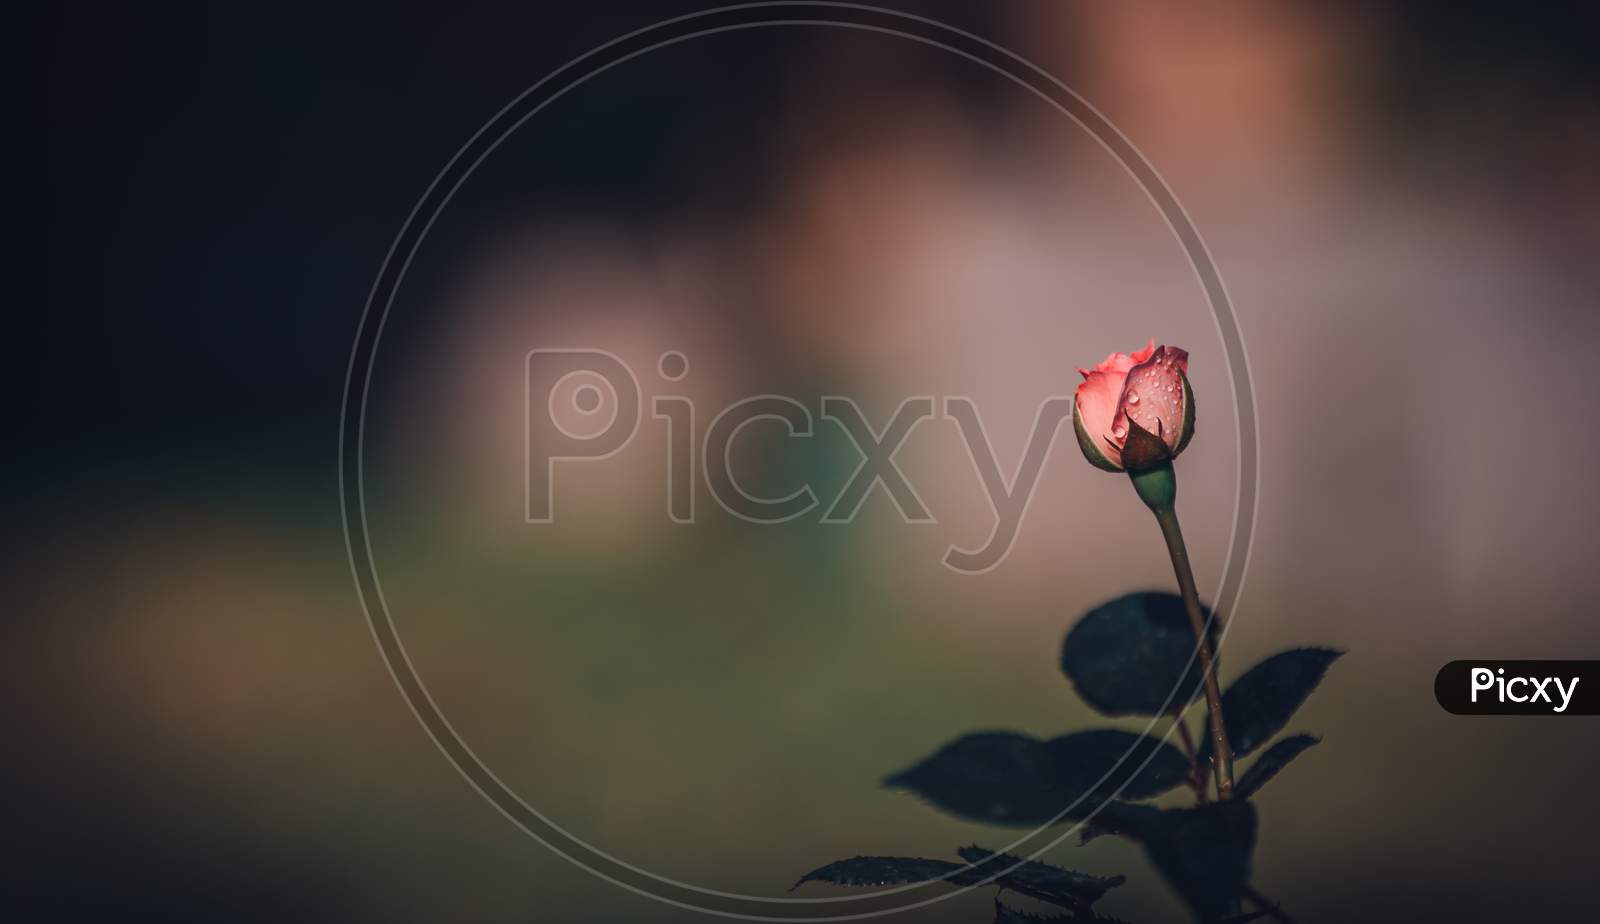 Beautiful Pink Rosebud About To Bloom In The Morning, Negative Space For Adding Text On The Left Of The Photograph.